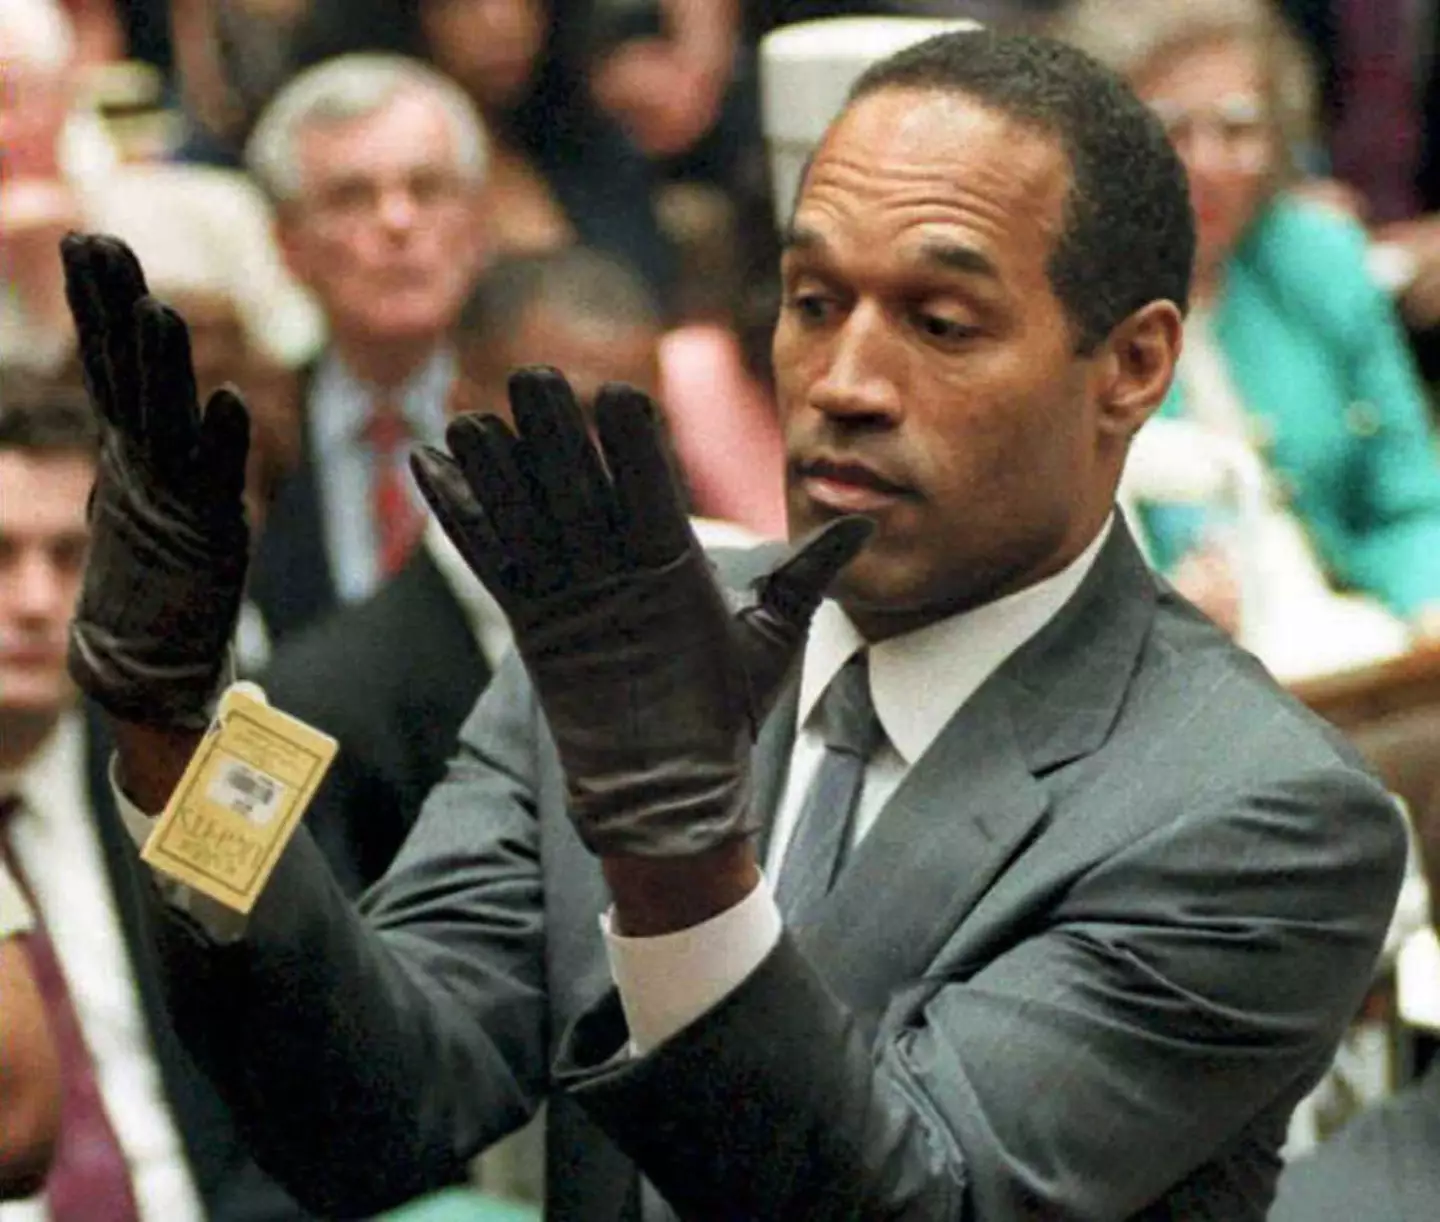 Shrek 2 included a reference to former footballer OJ Simpson. (VINCE BUCCI/AFP via Getty Images)